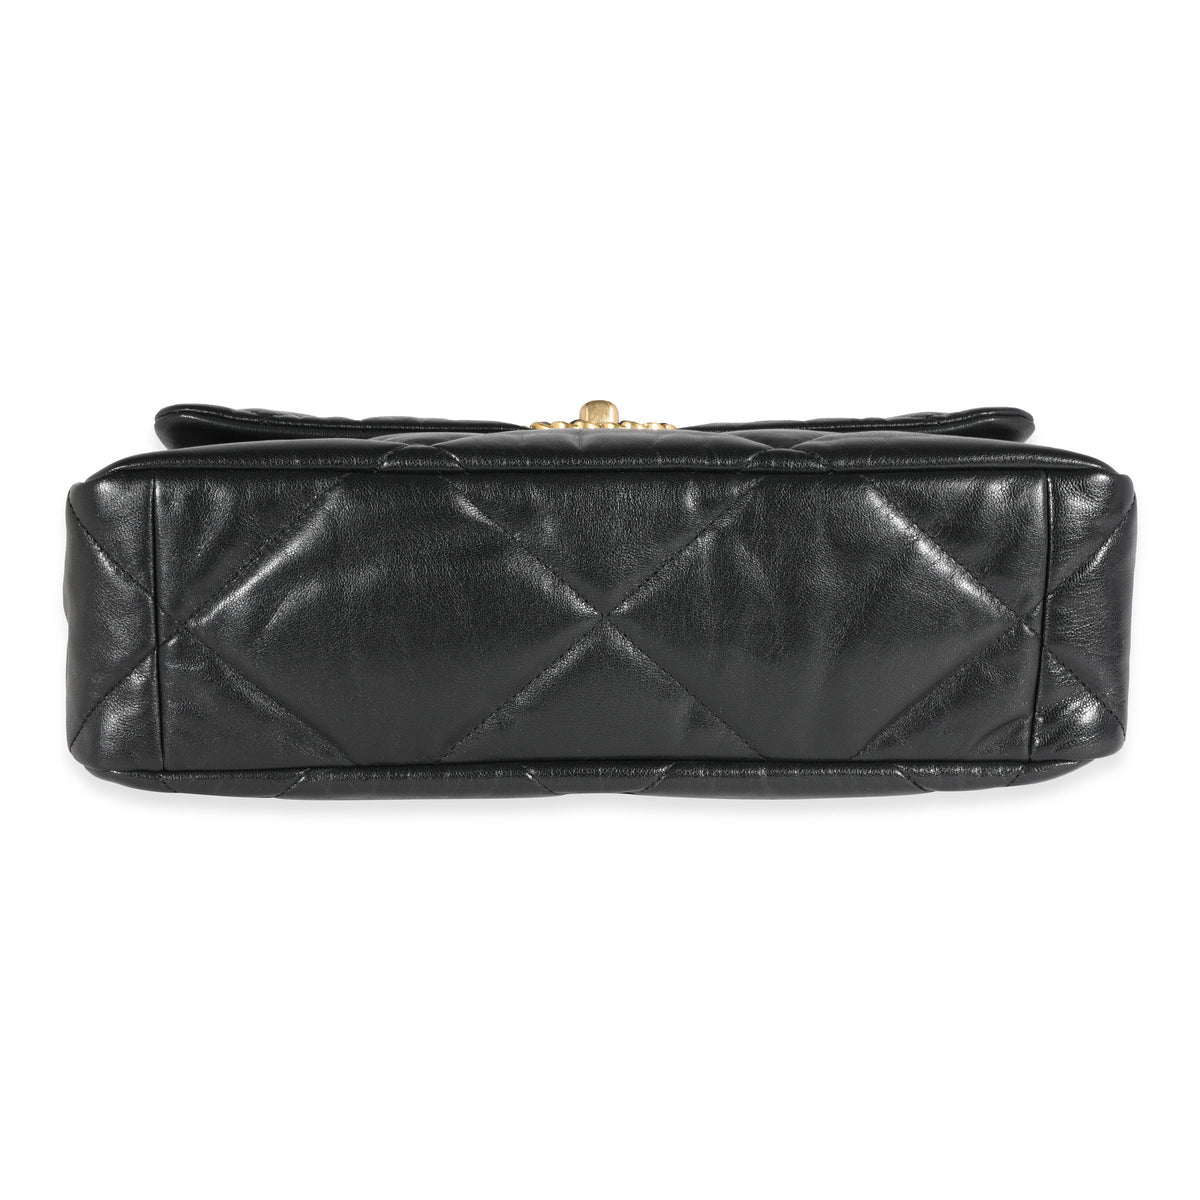 Chanel Black Quilted Lambskin Chanel 19 Large Flap Bag